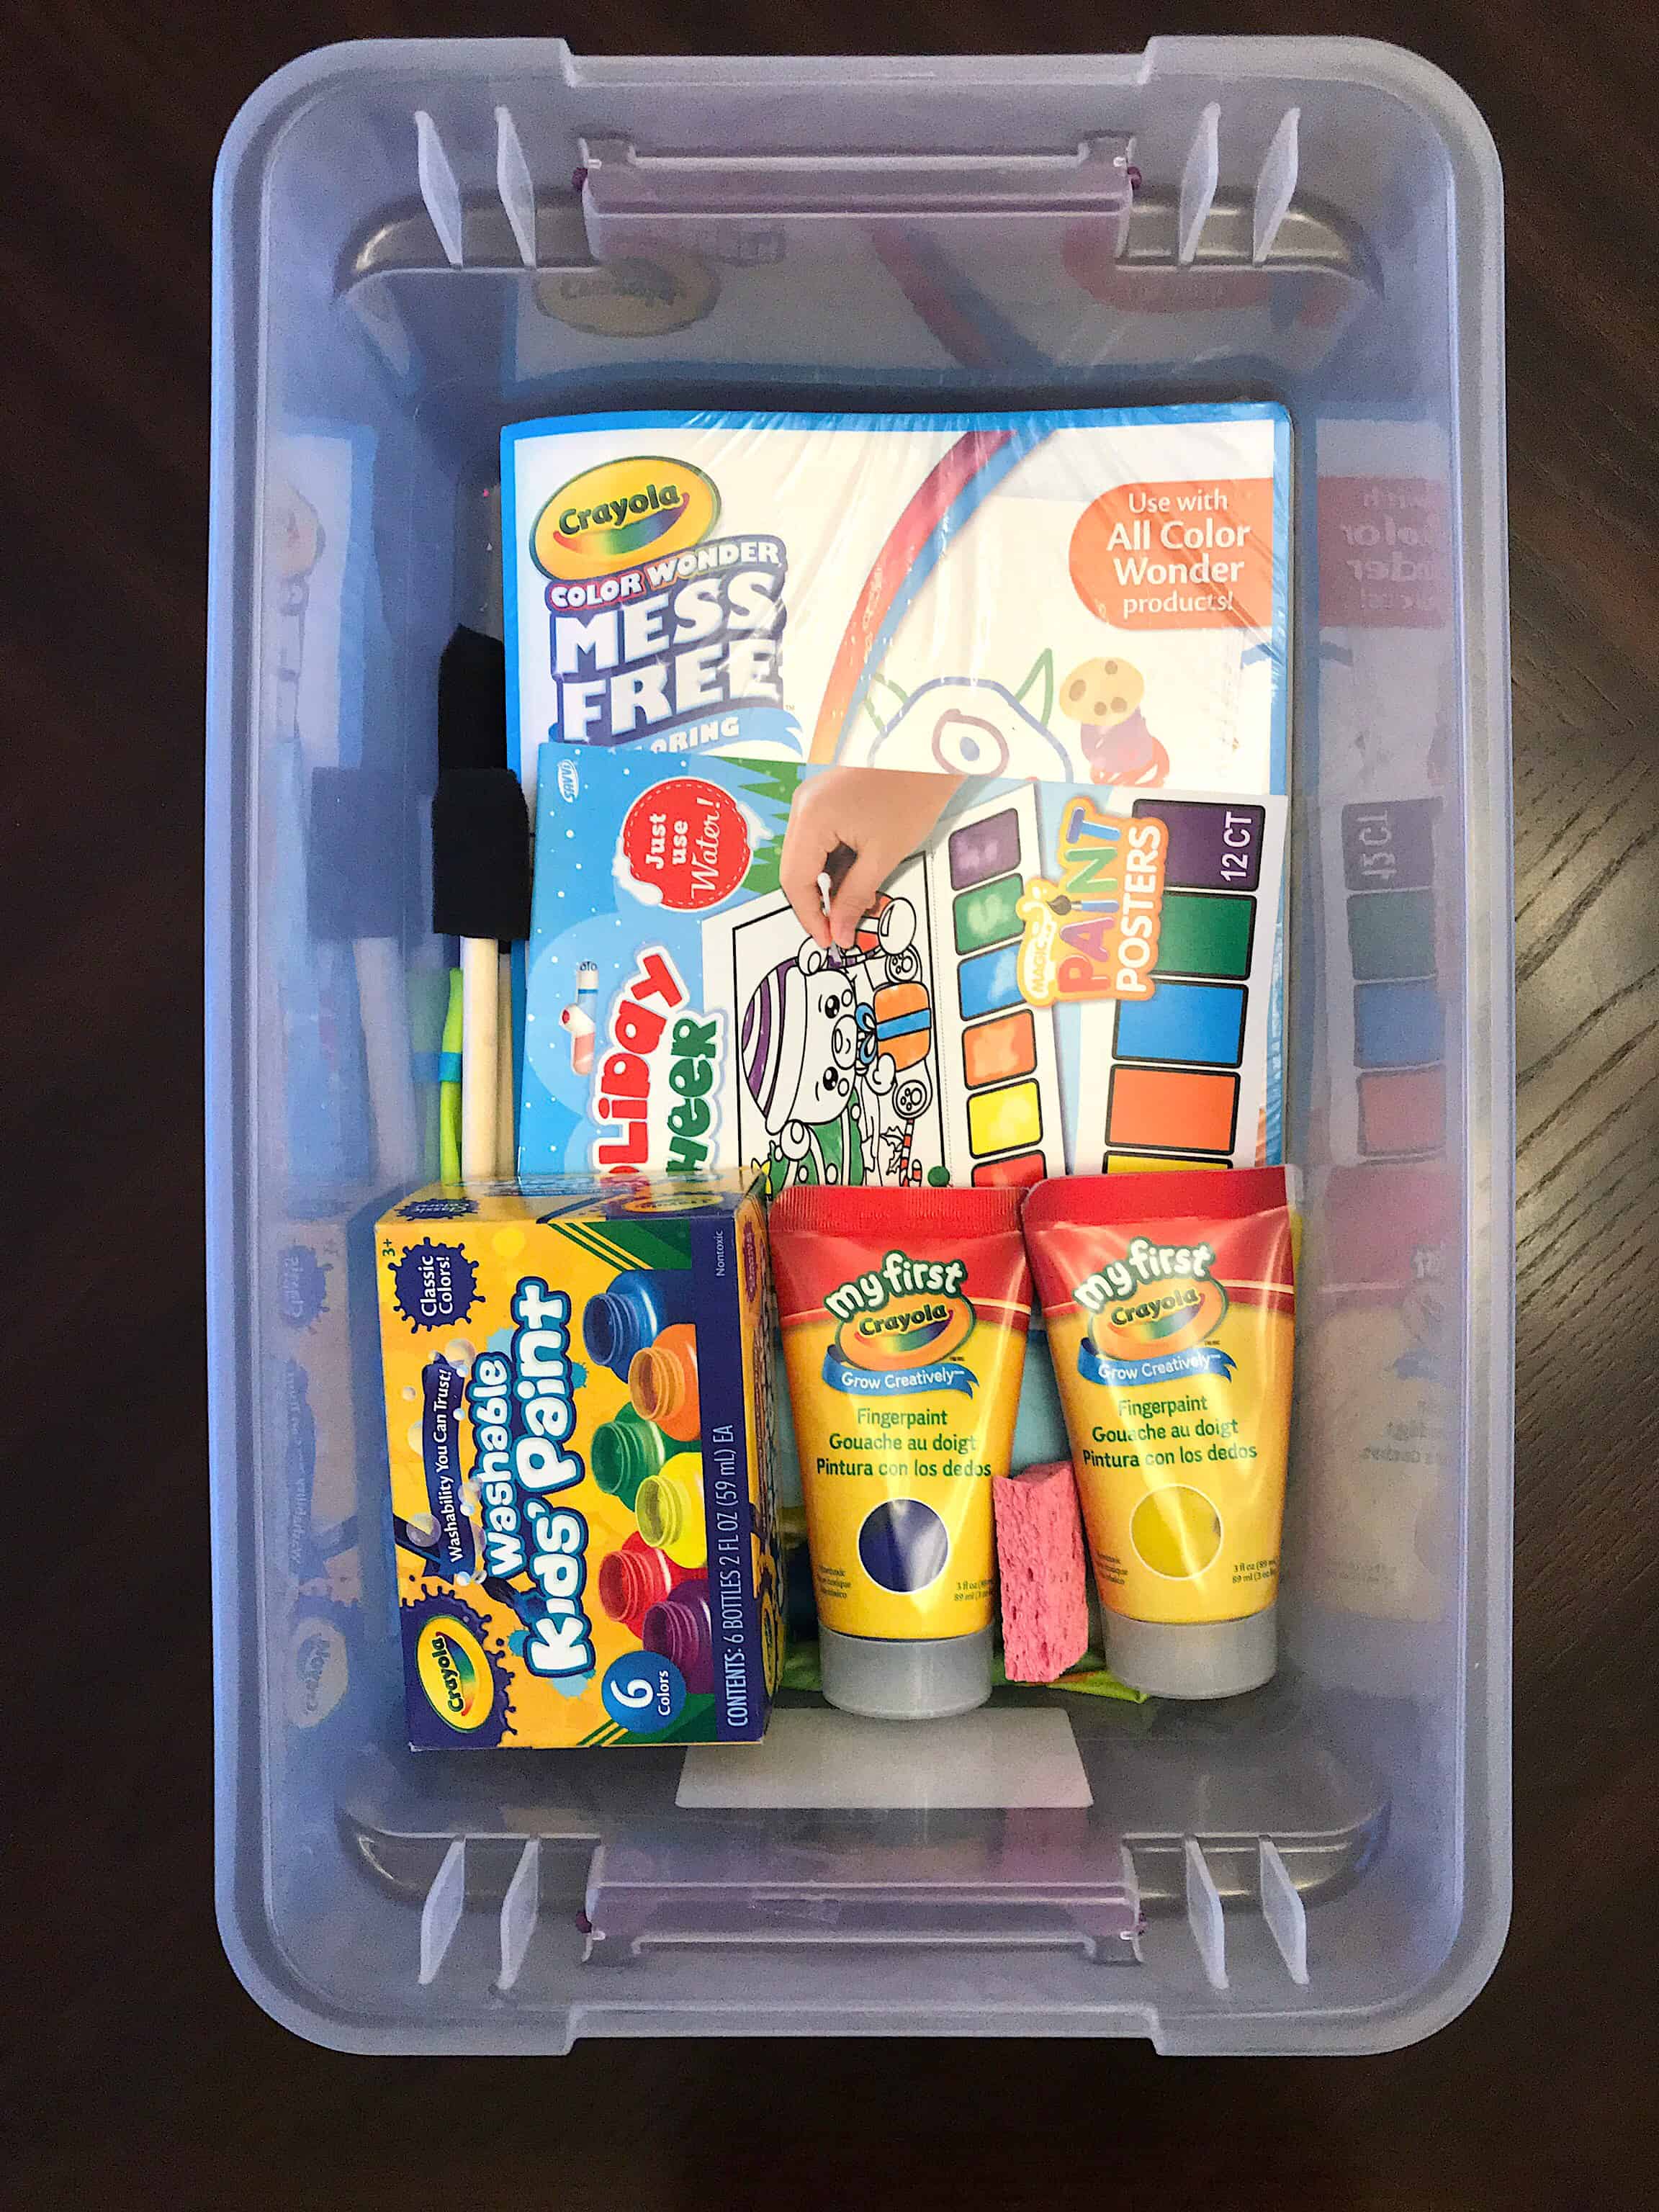 Learn how to make easy quiet bins toddlers will love. Teach your 2 year old how to do independent play by using bins with pipe cleaners, popsicle sticks, and other dollar store items. Examples included! #naptime #learningactivities #activitiesforkids #kidactivities #preschoolactivities